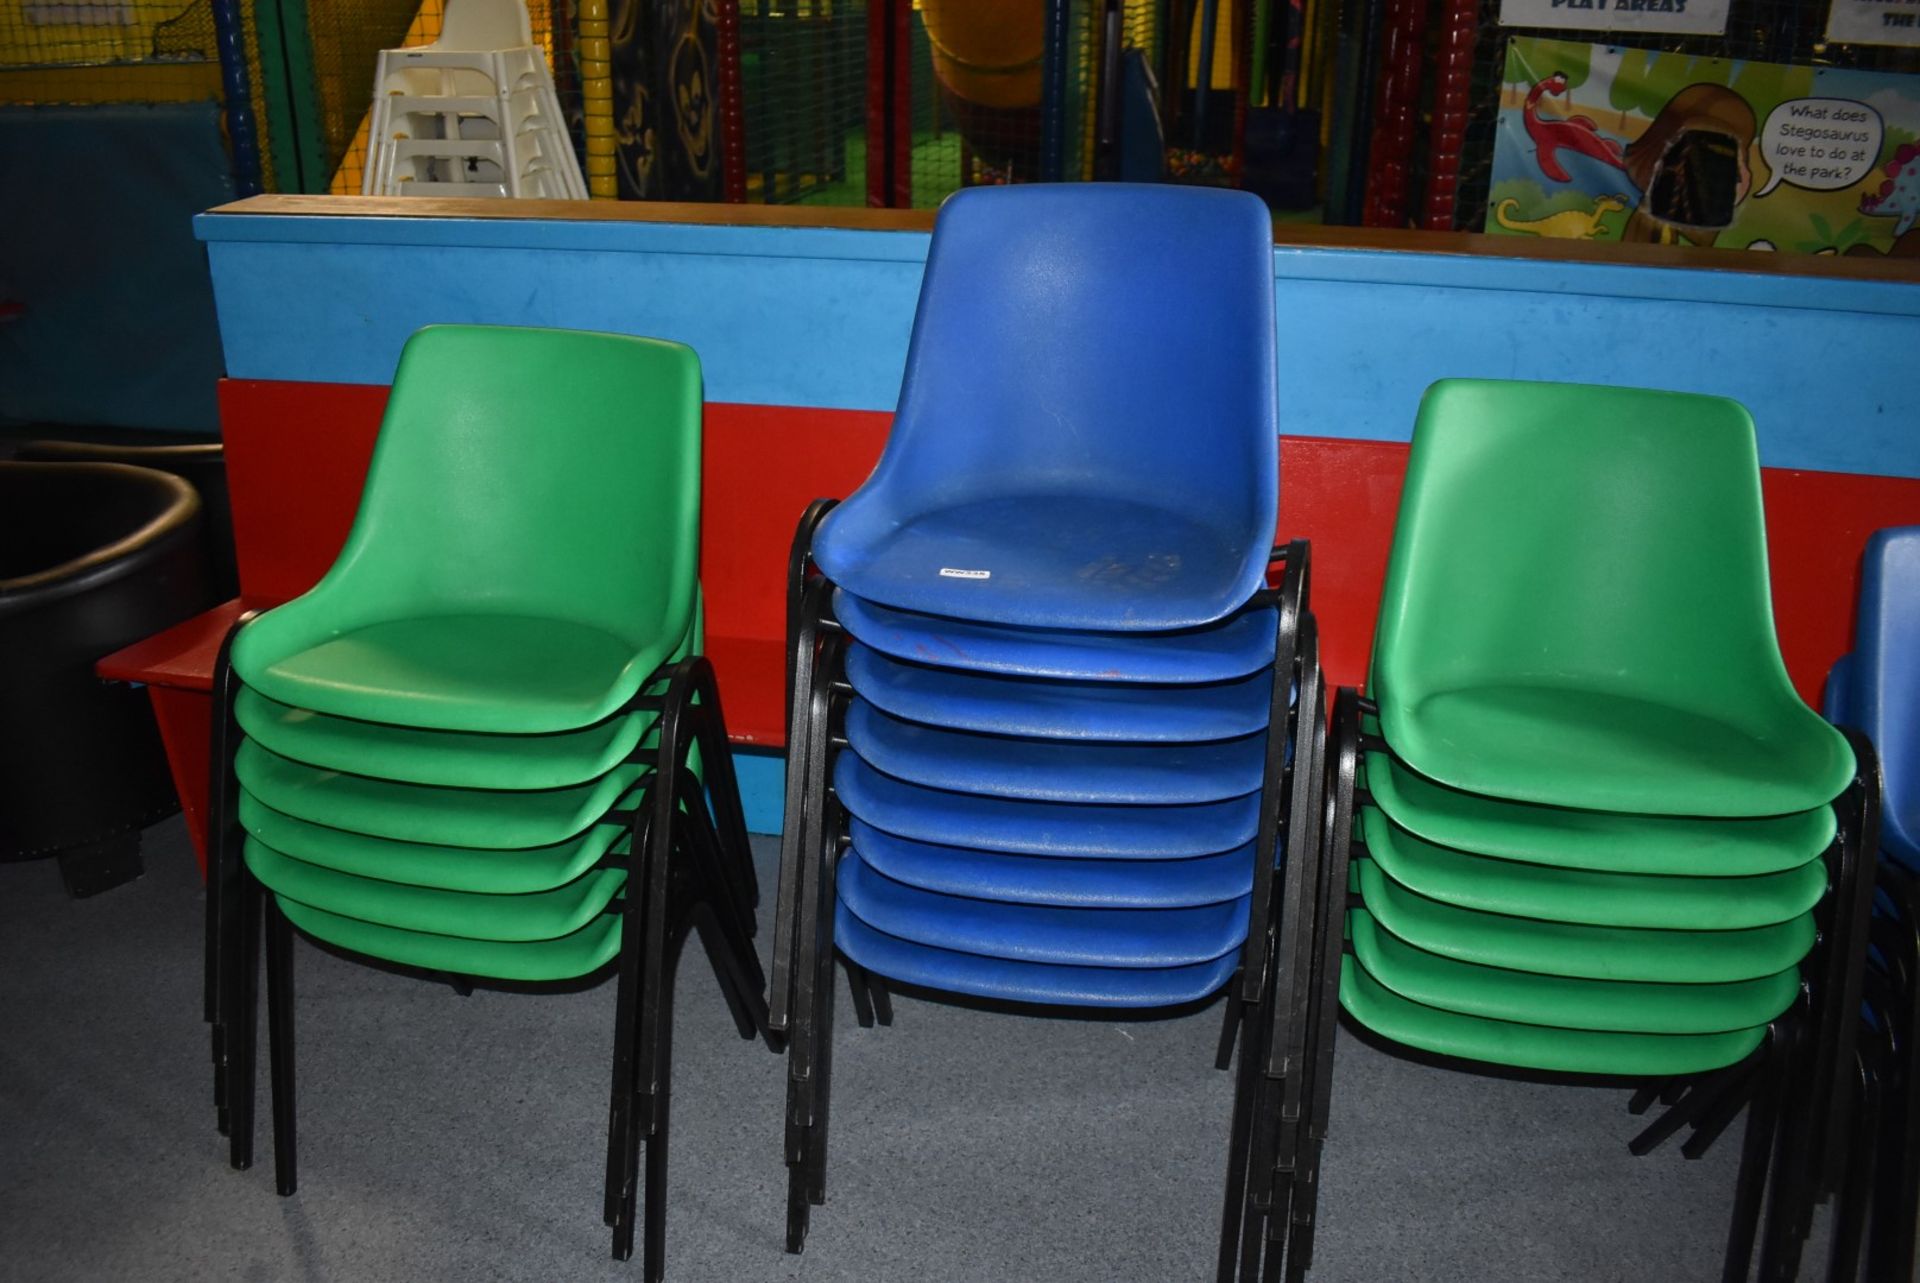 24 x Plastic Stackable Chairs With Black Metal Legs - Various Colours - Suitable For Adults or - Image 3 of 4